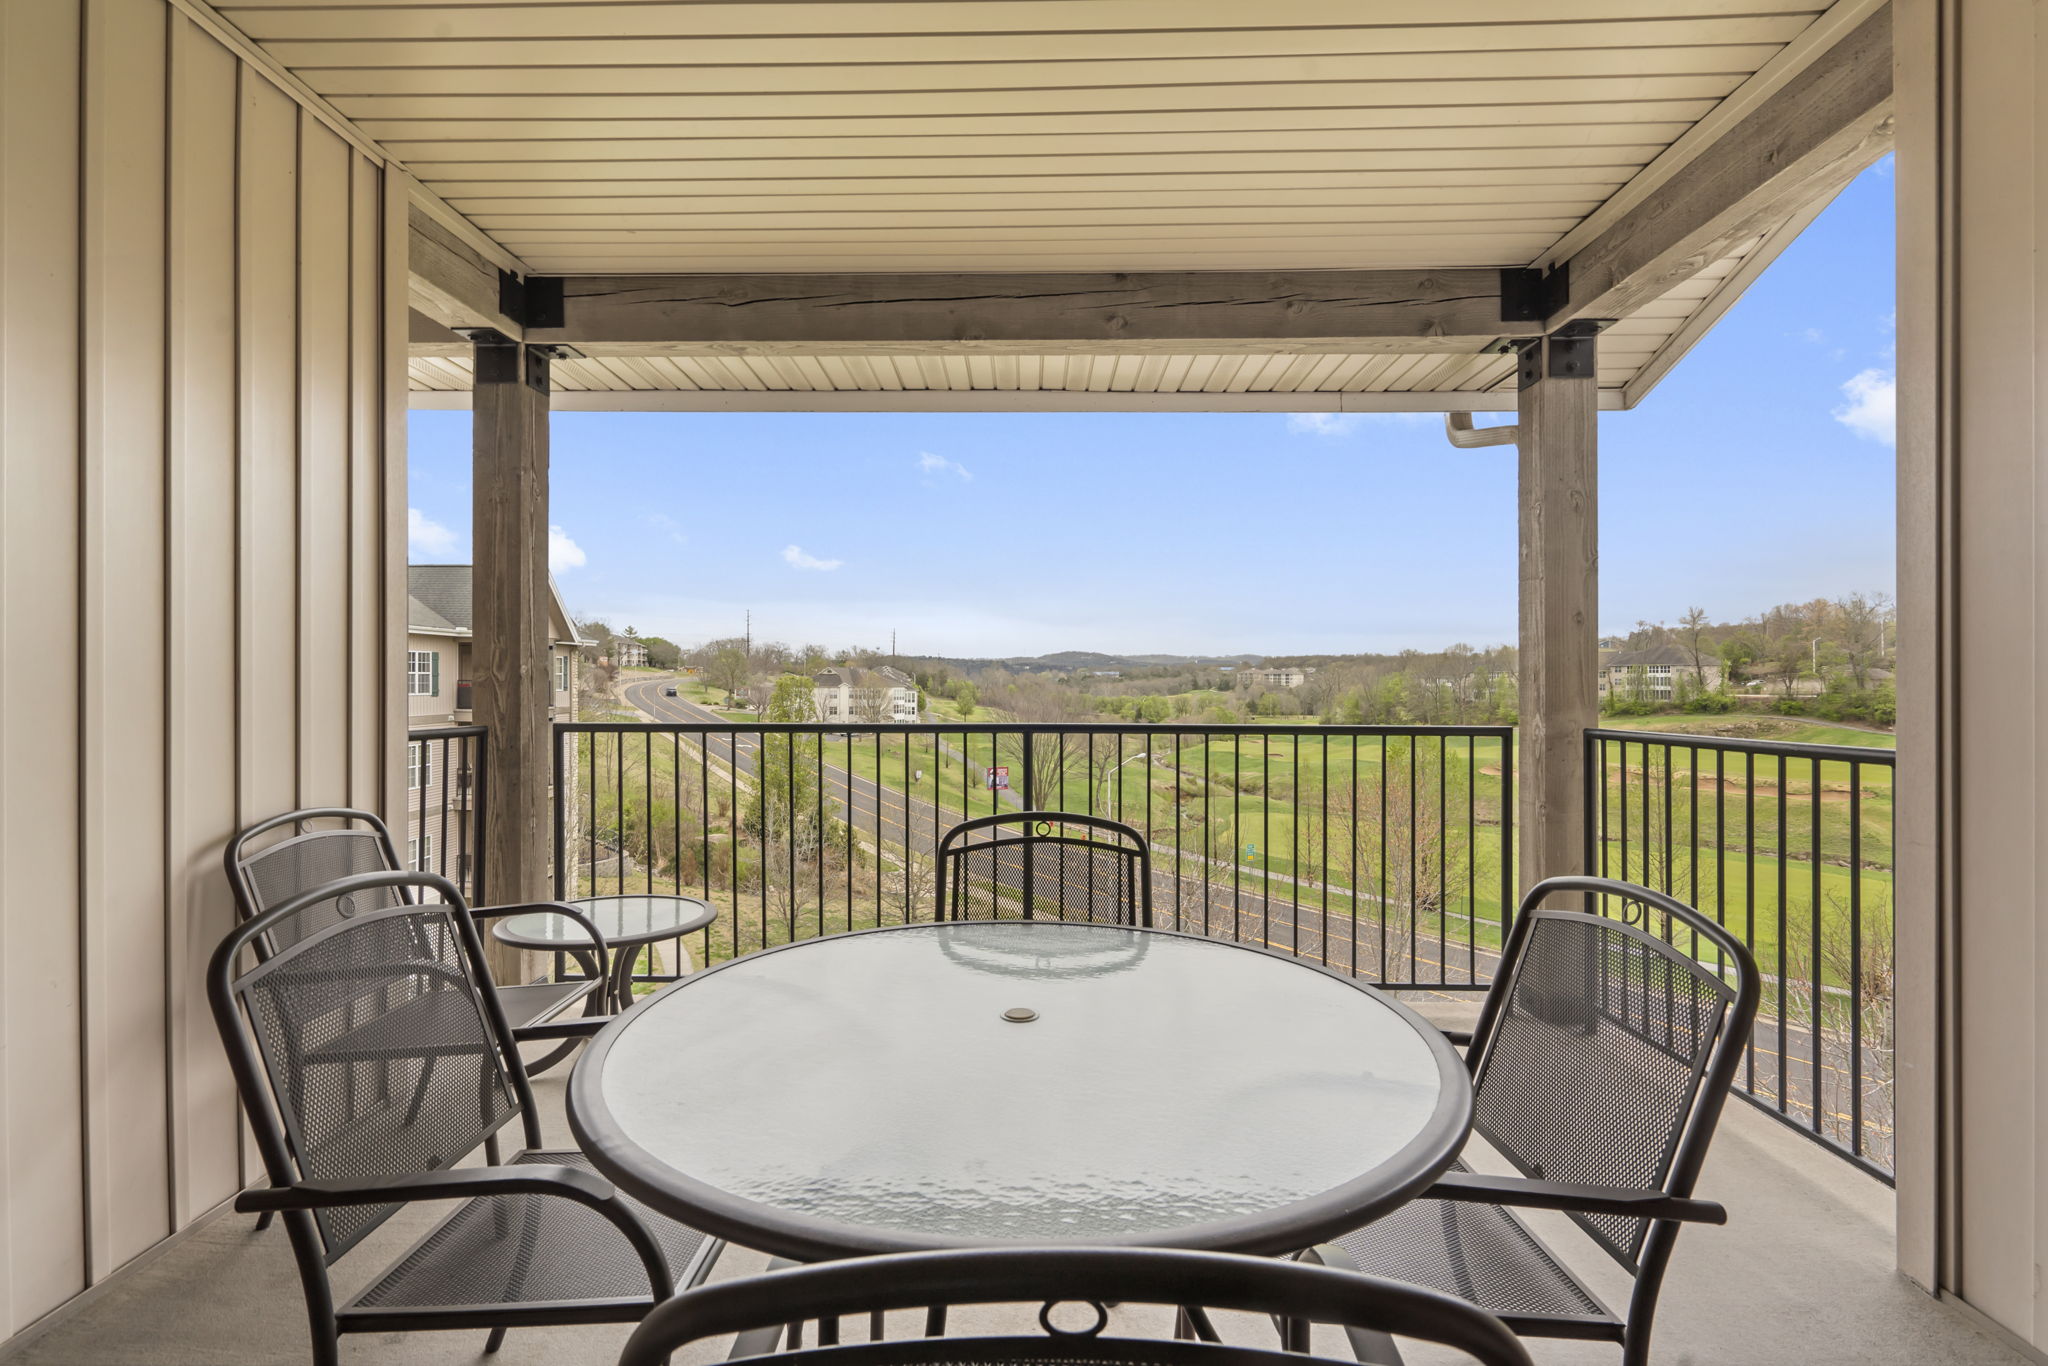 Covered Patio with Golf Course View